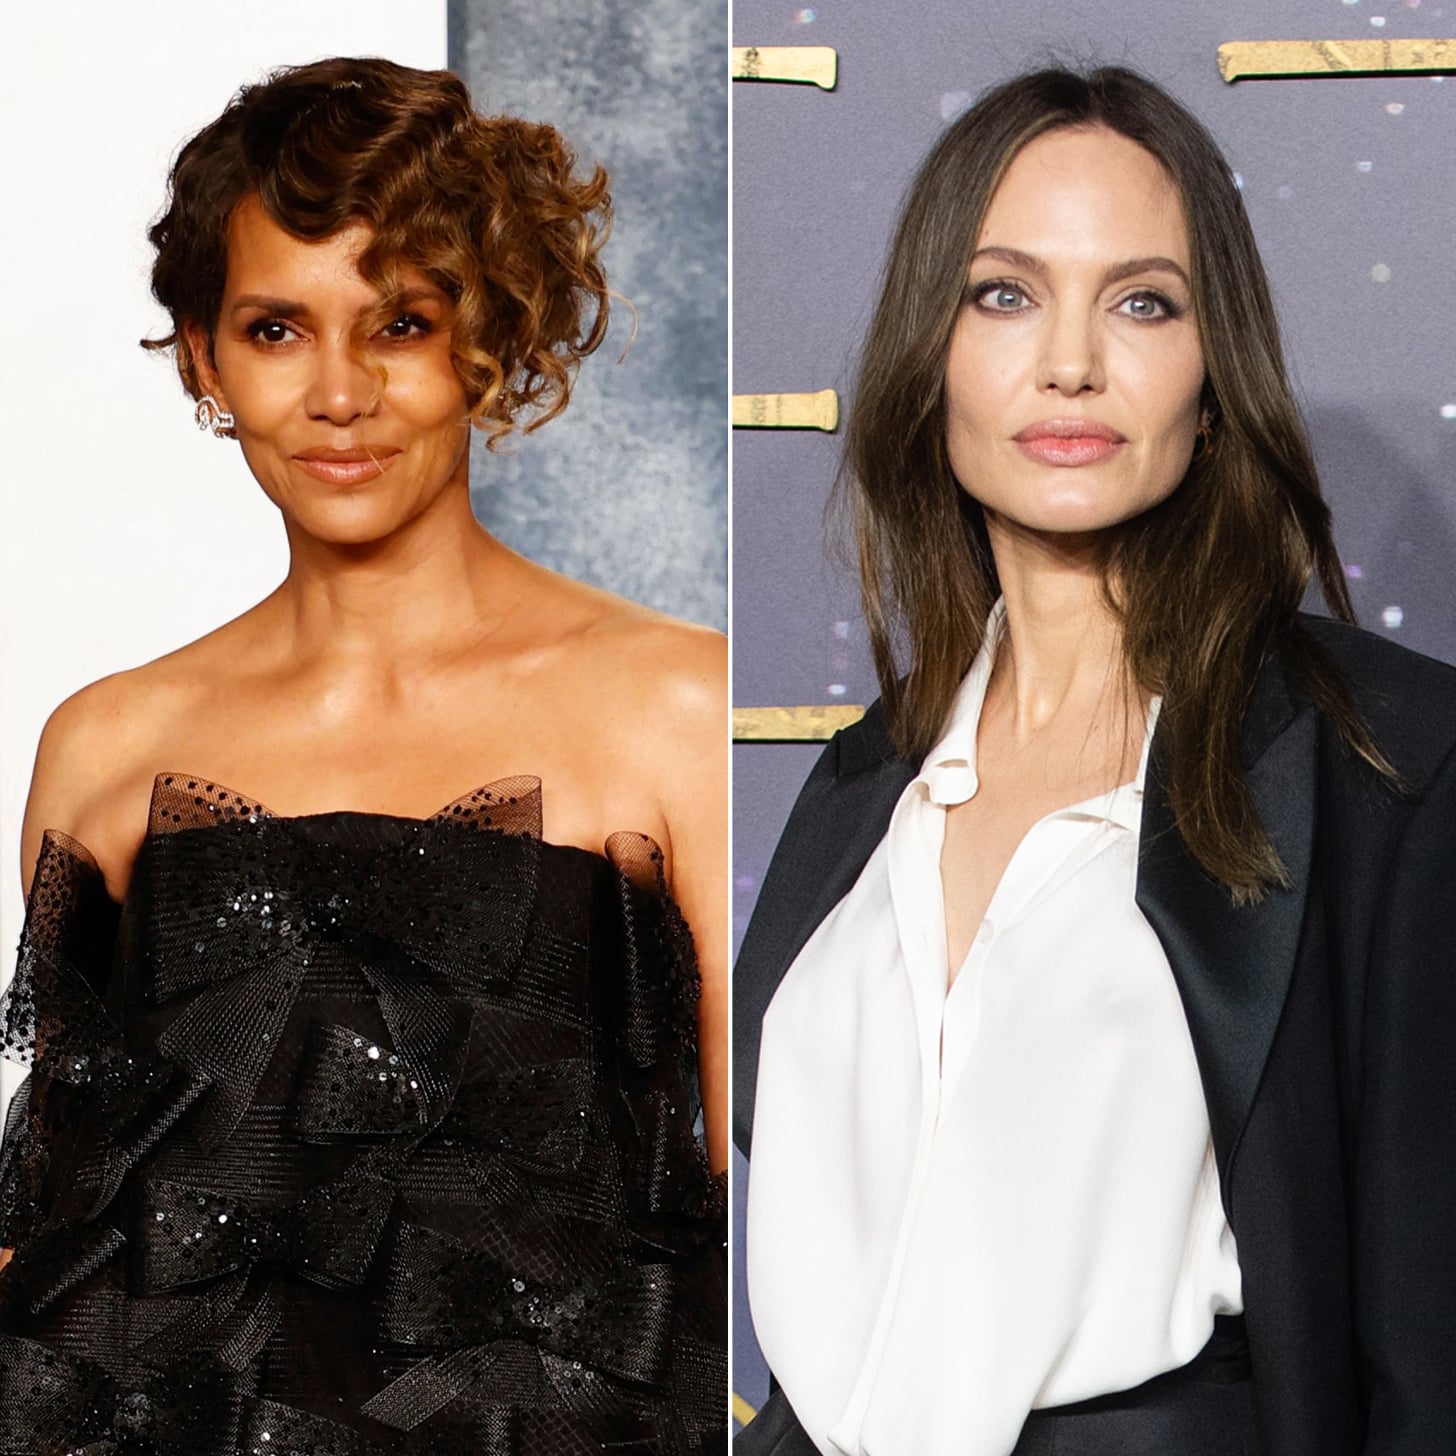 Angelina Jolie And Halle Berry To Star In 'Maude V Maude' Movie